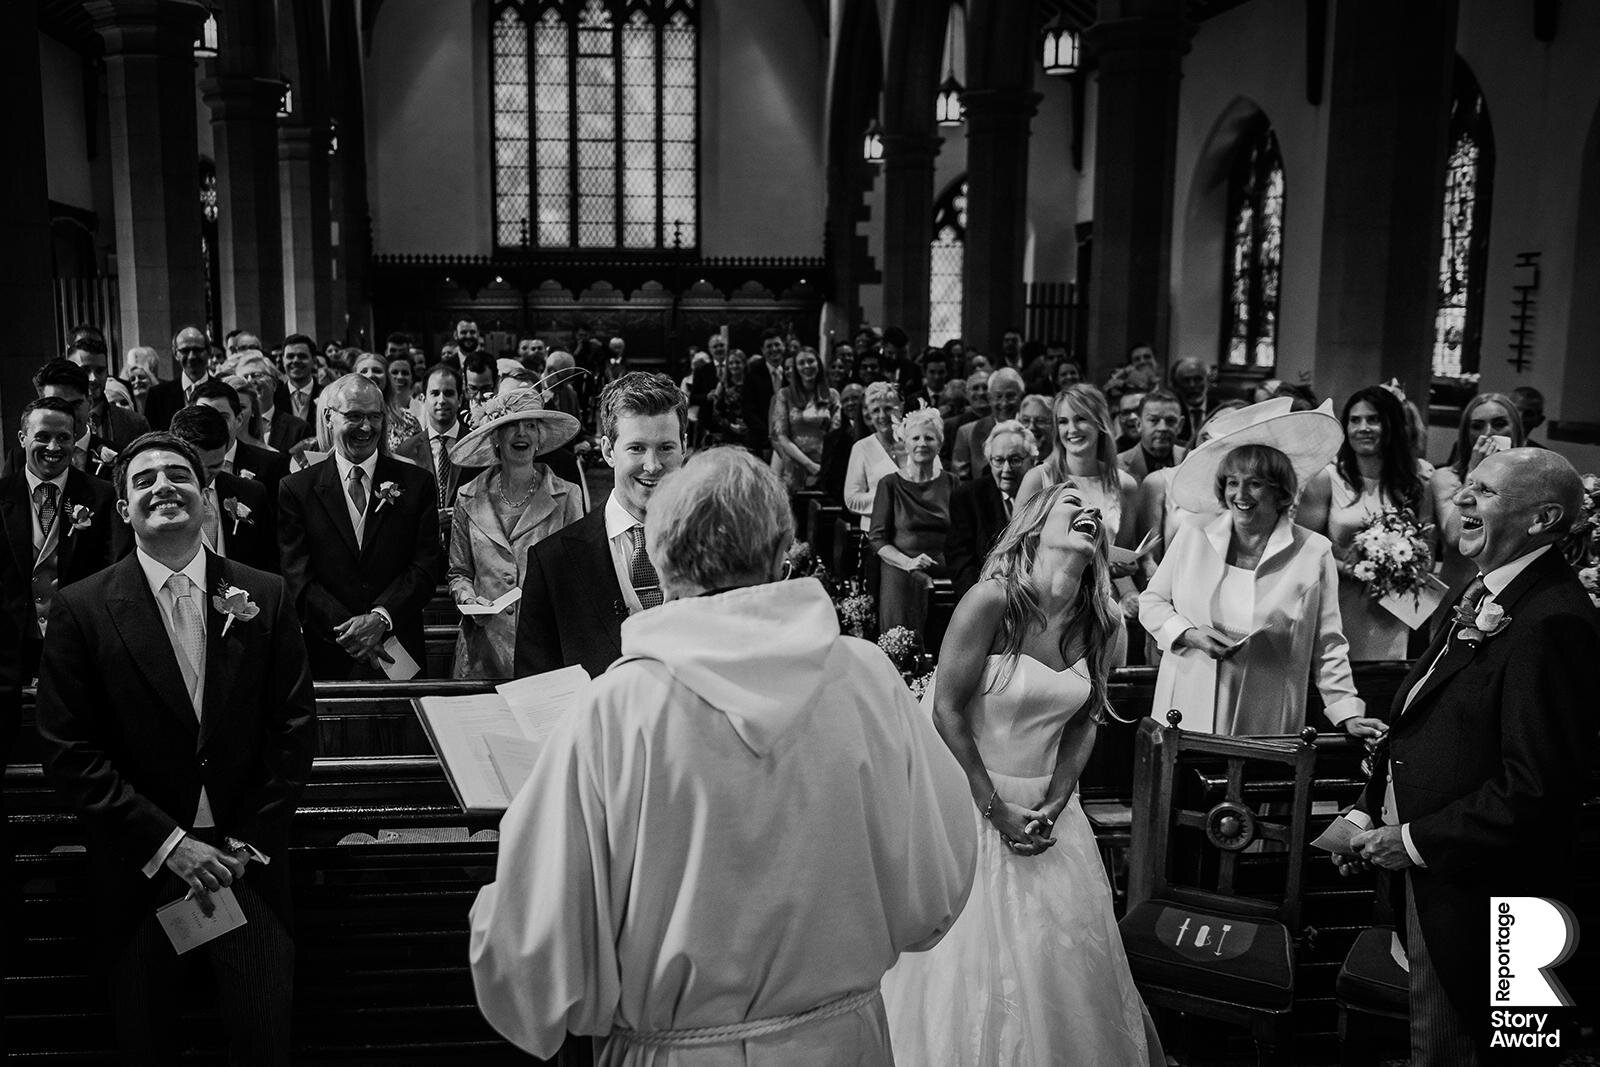  Bride, groom and guests laughing in church 